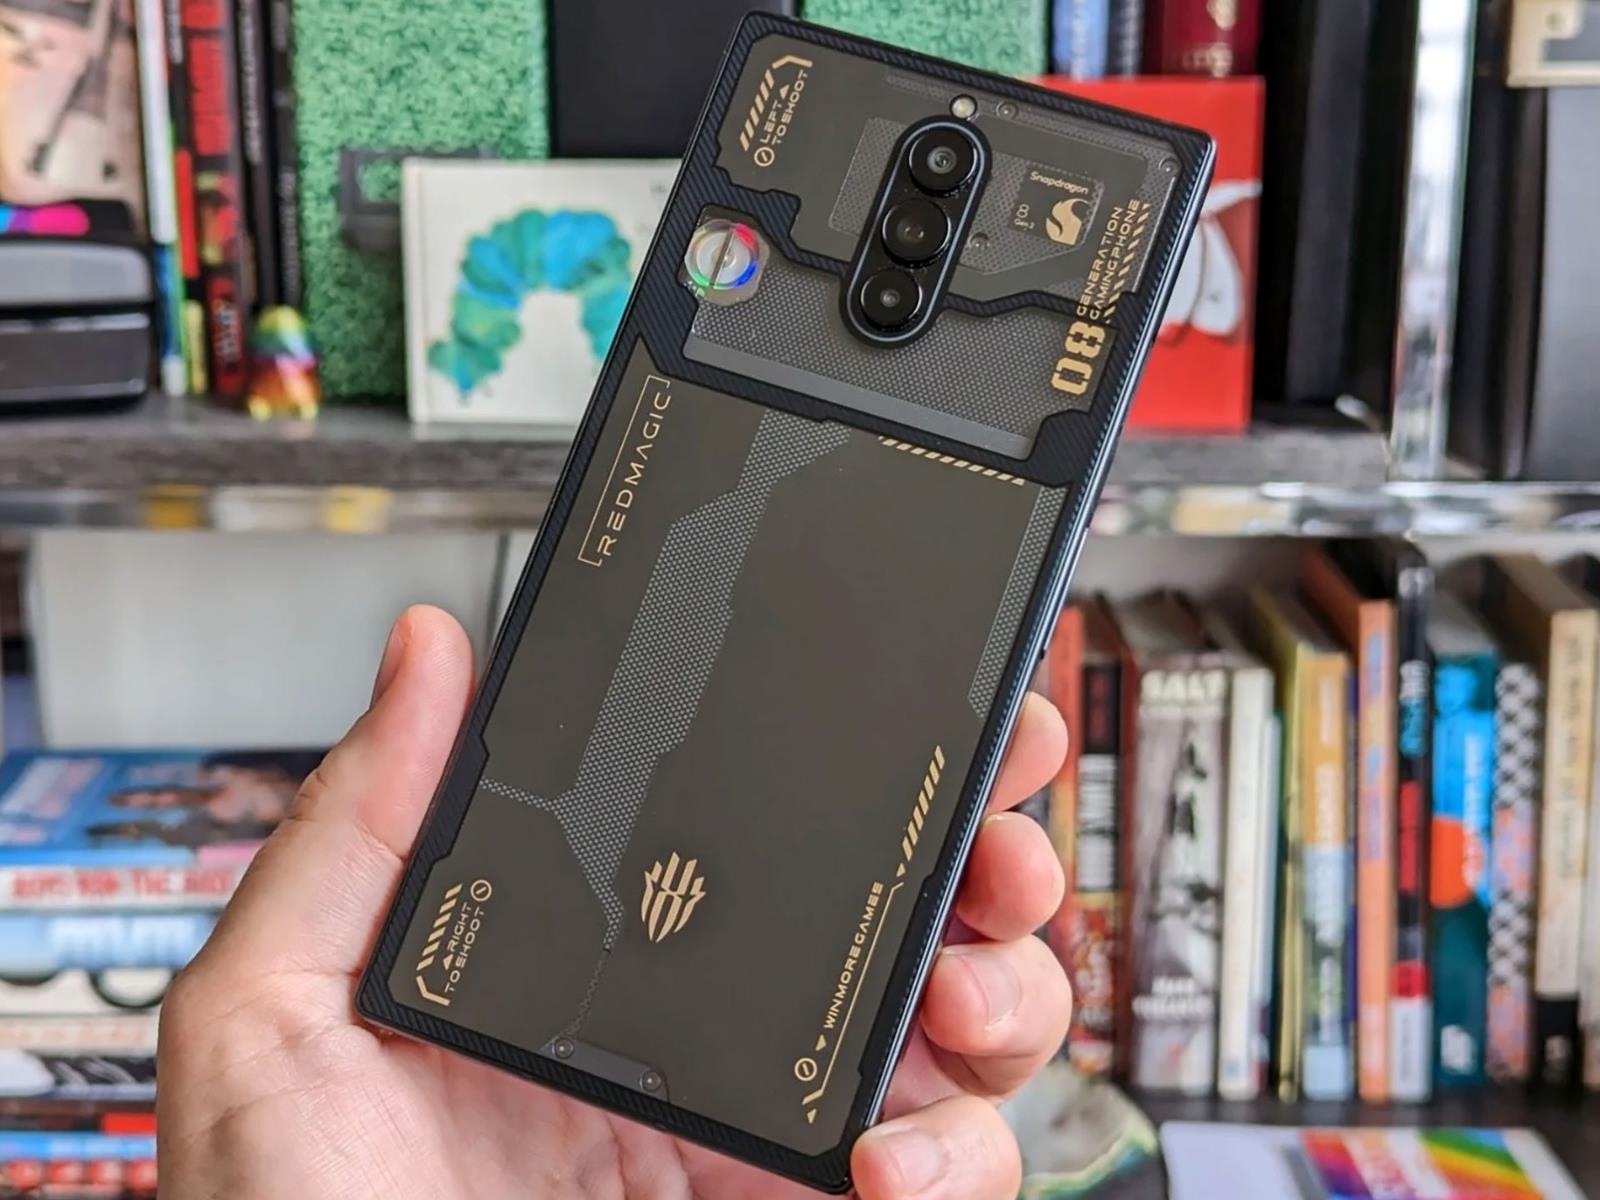 RedMagic 8 Pro Review: A Hot Android Gaming Value Phone